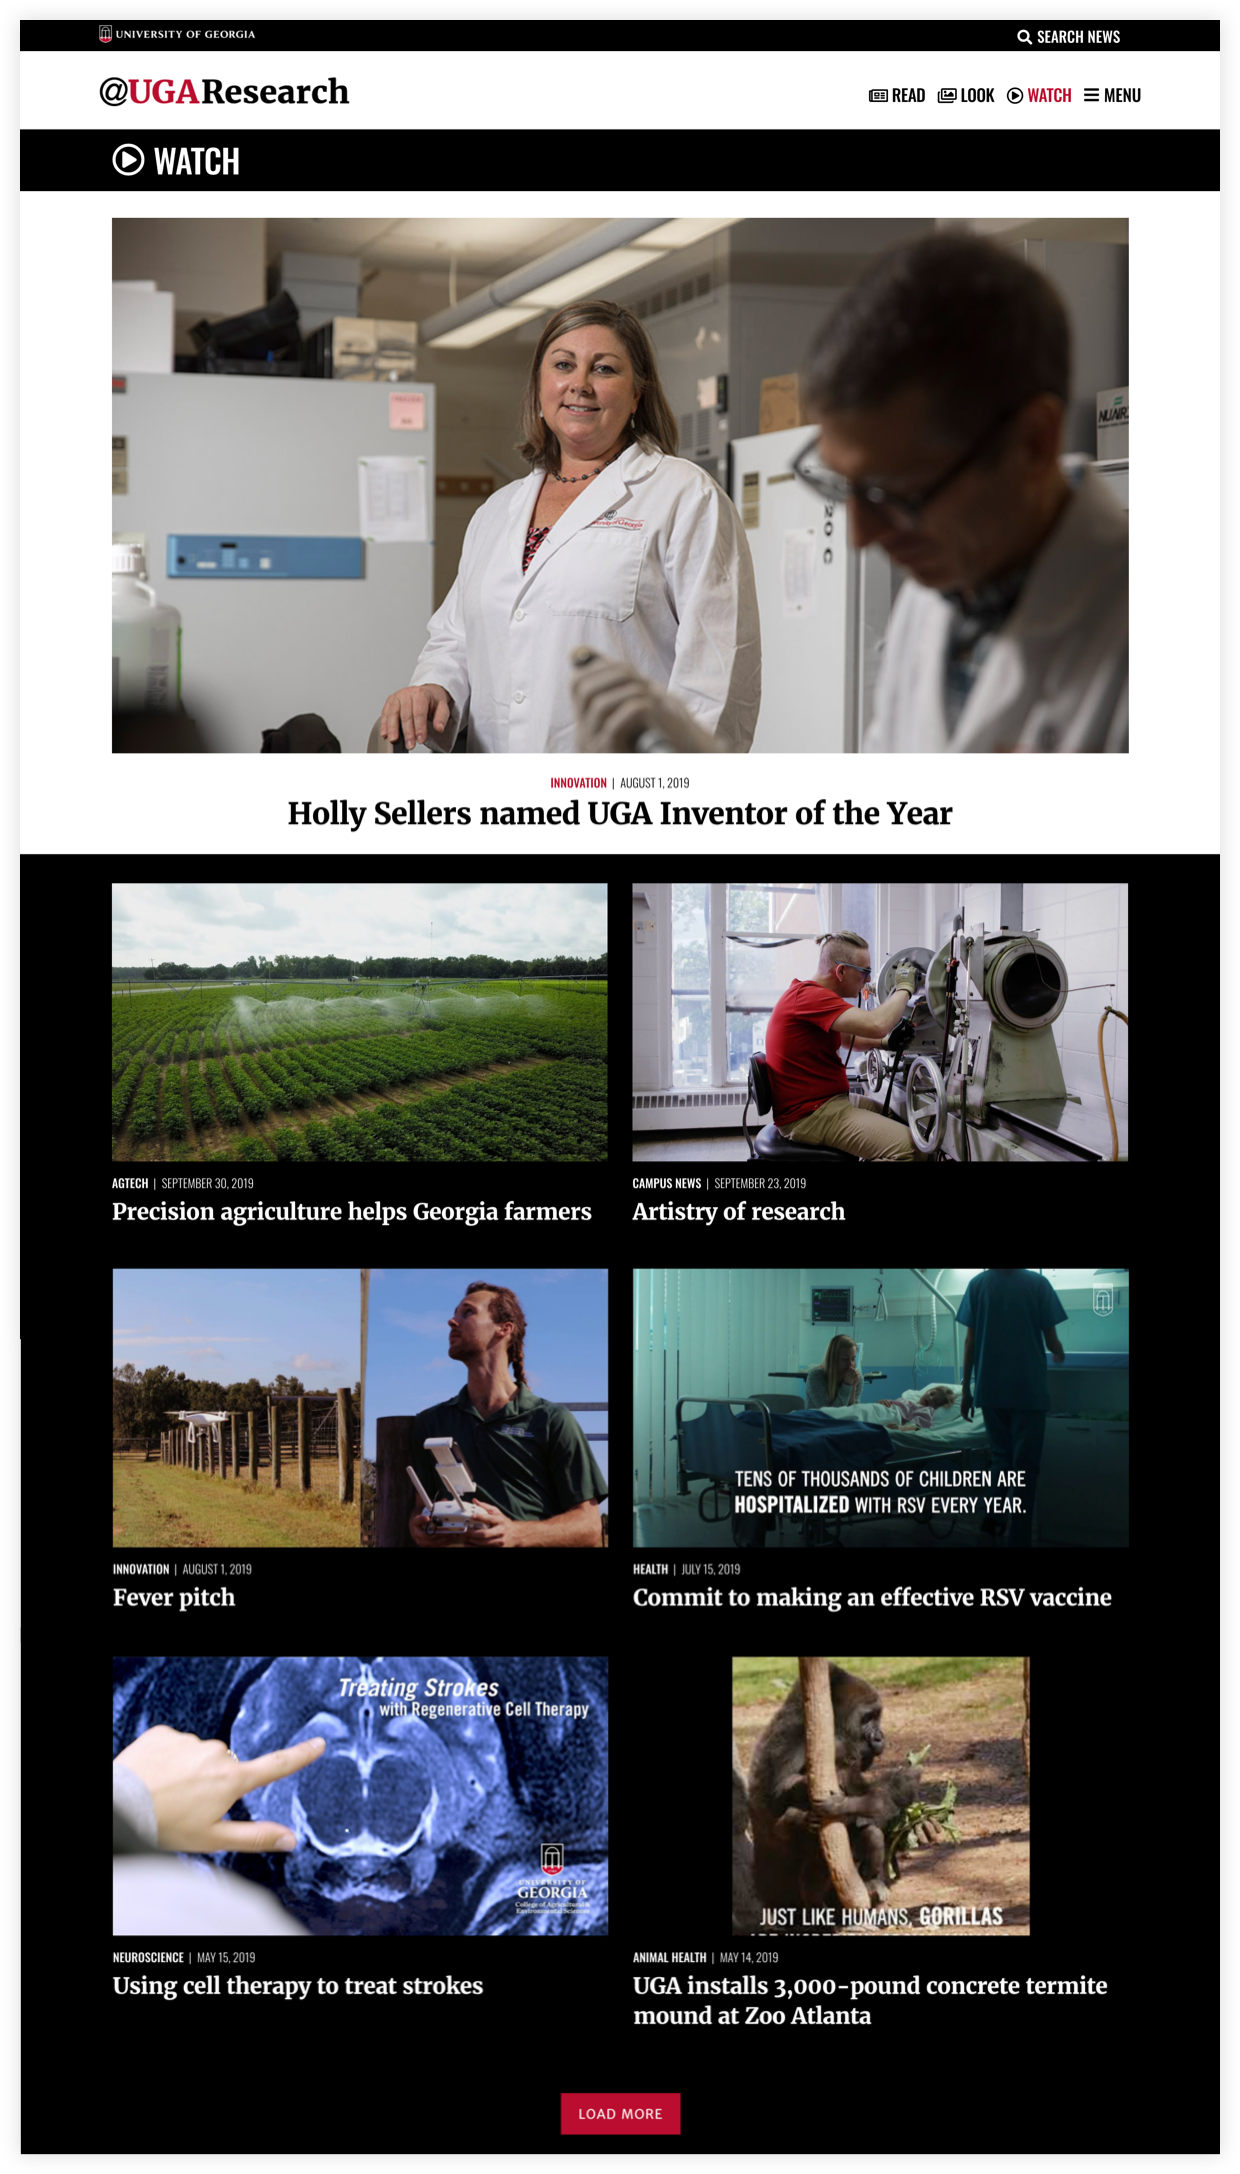 UGA Research News WATCH page with featured video posts and latest video posts